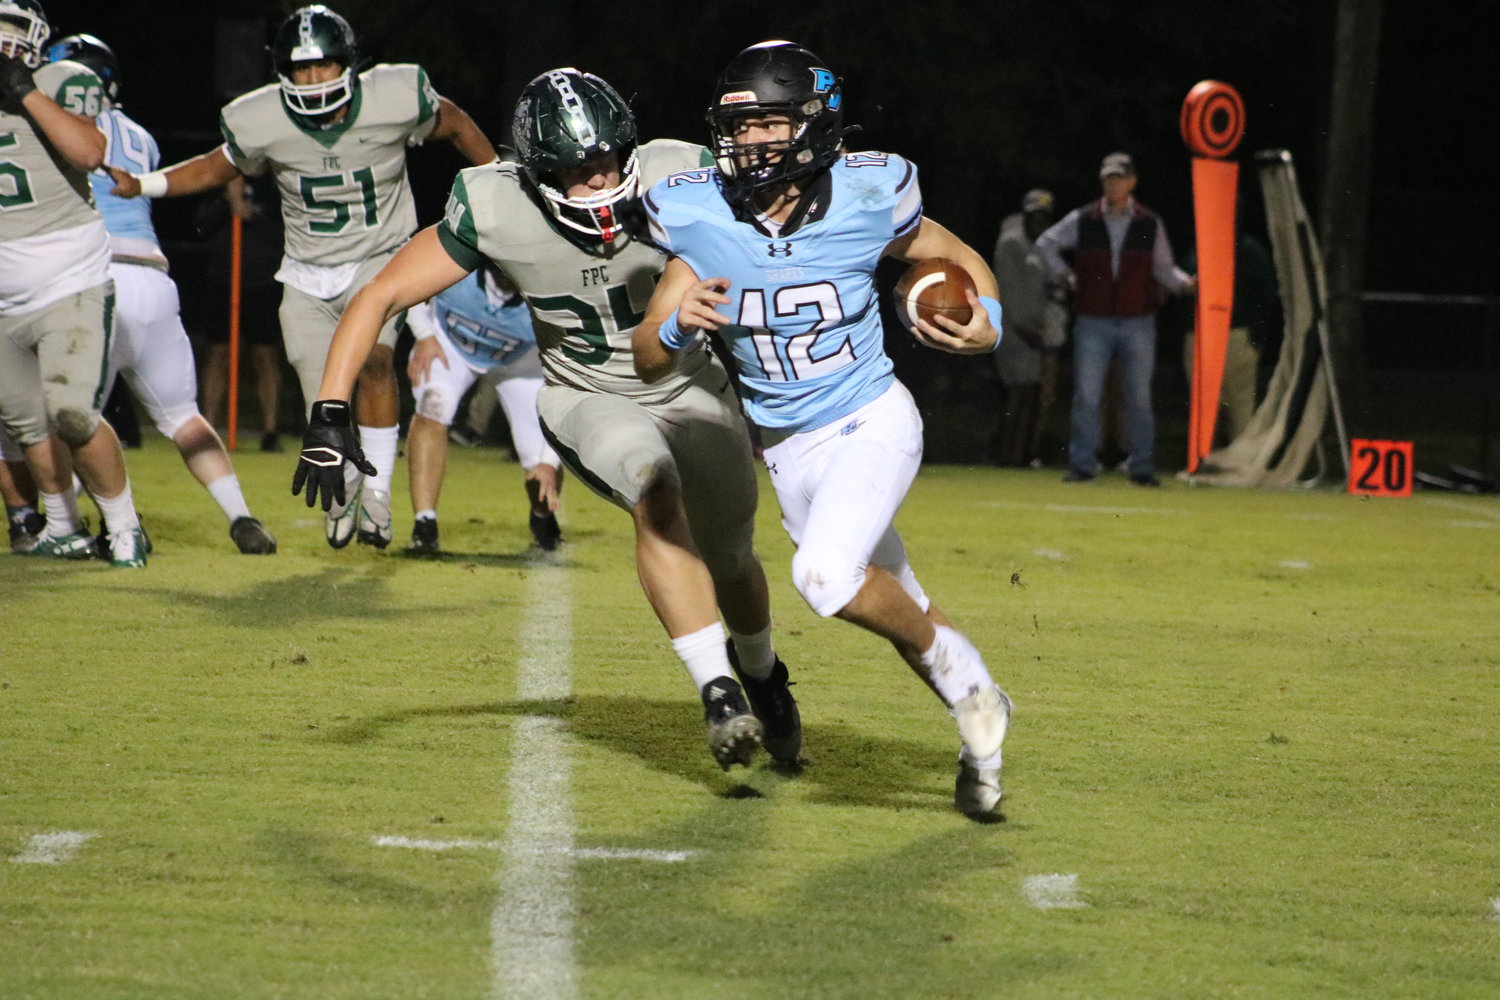 Ben Burk carries the ball against Flagler Palm Coast Oct. 3. He ran for two scores on the night.